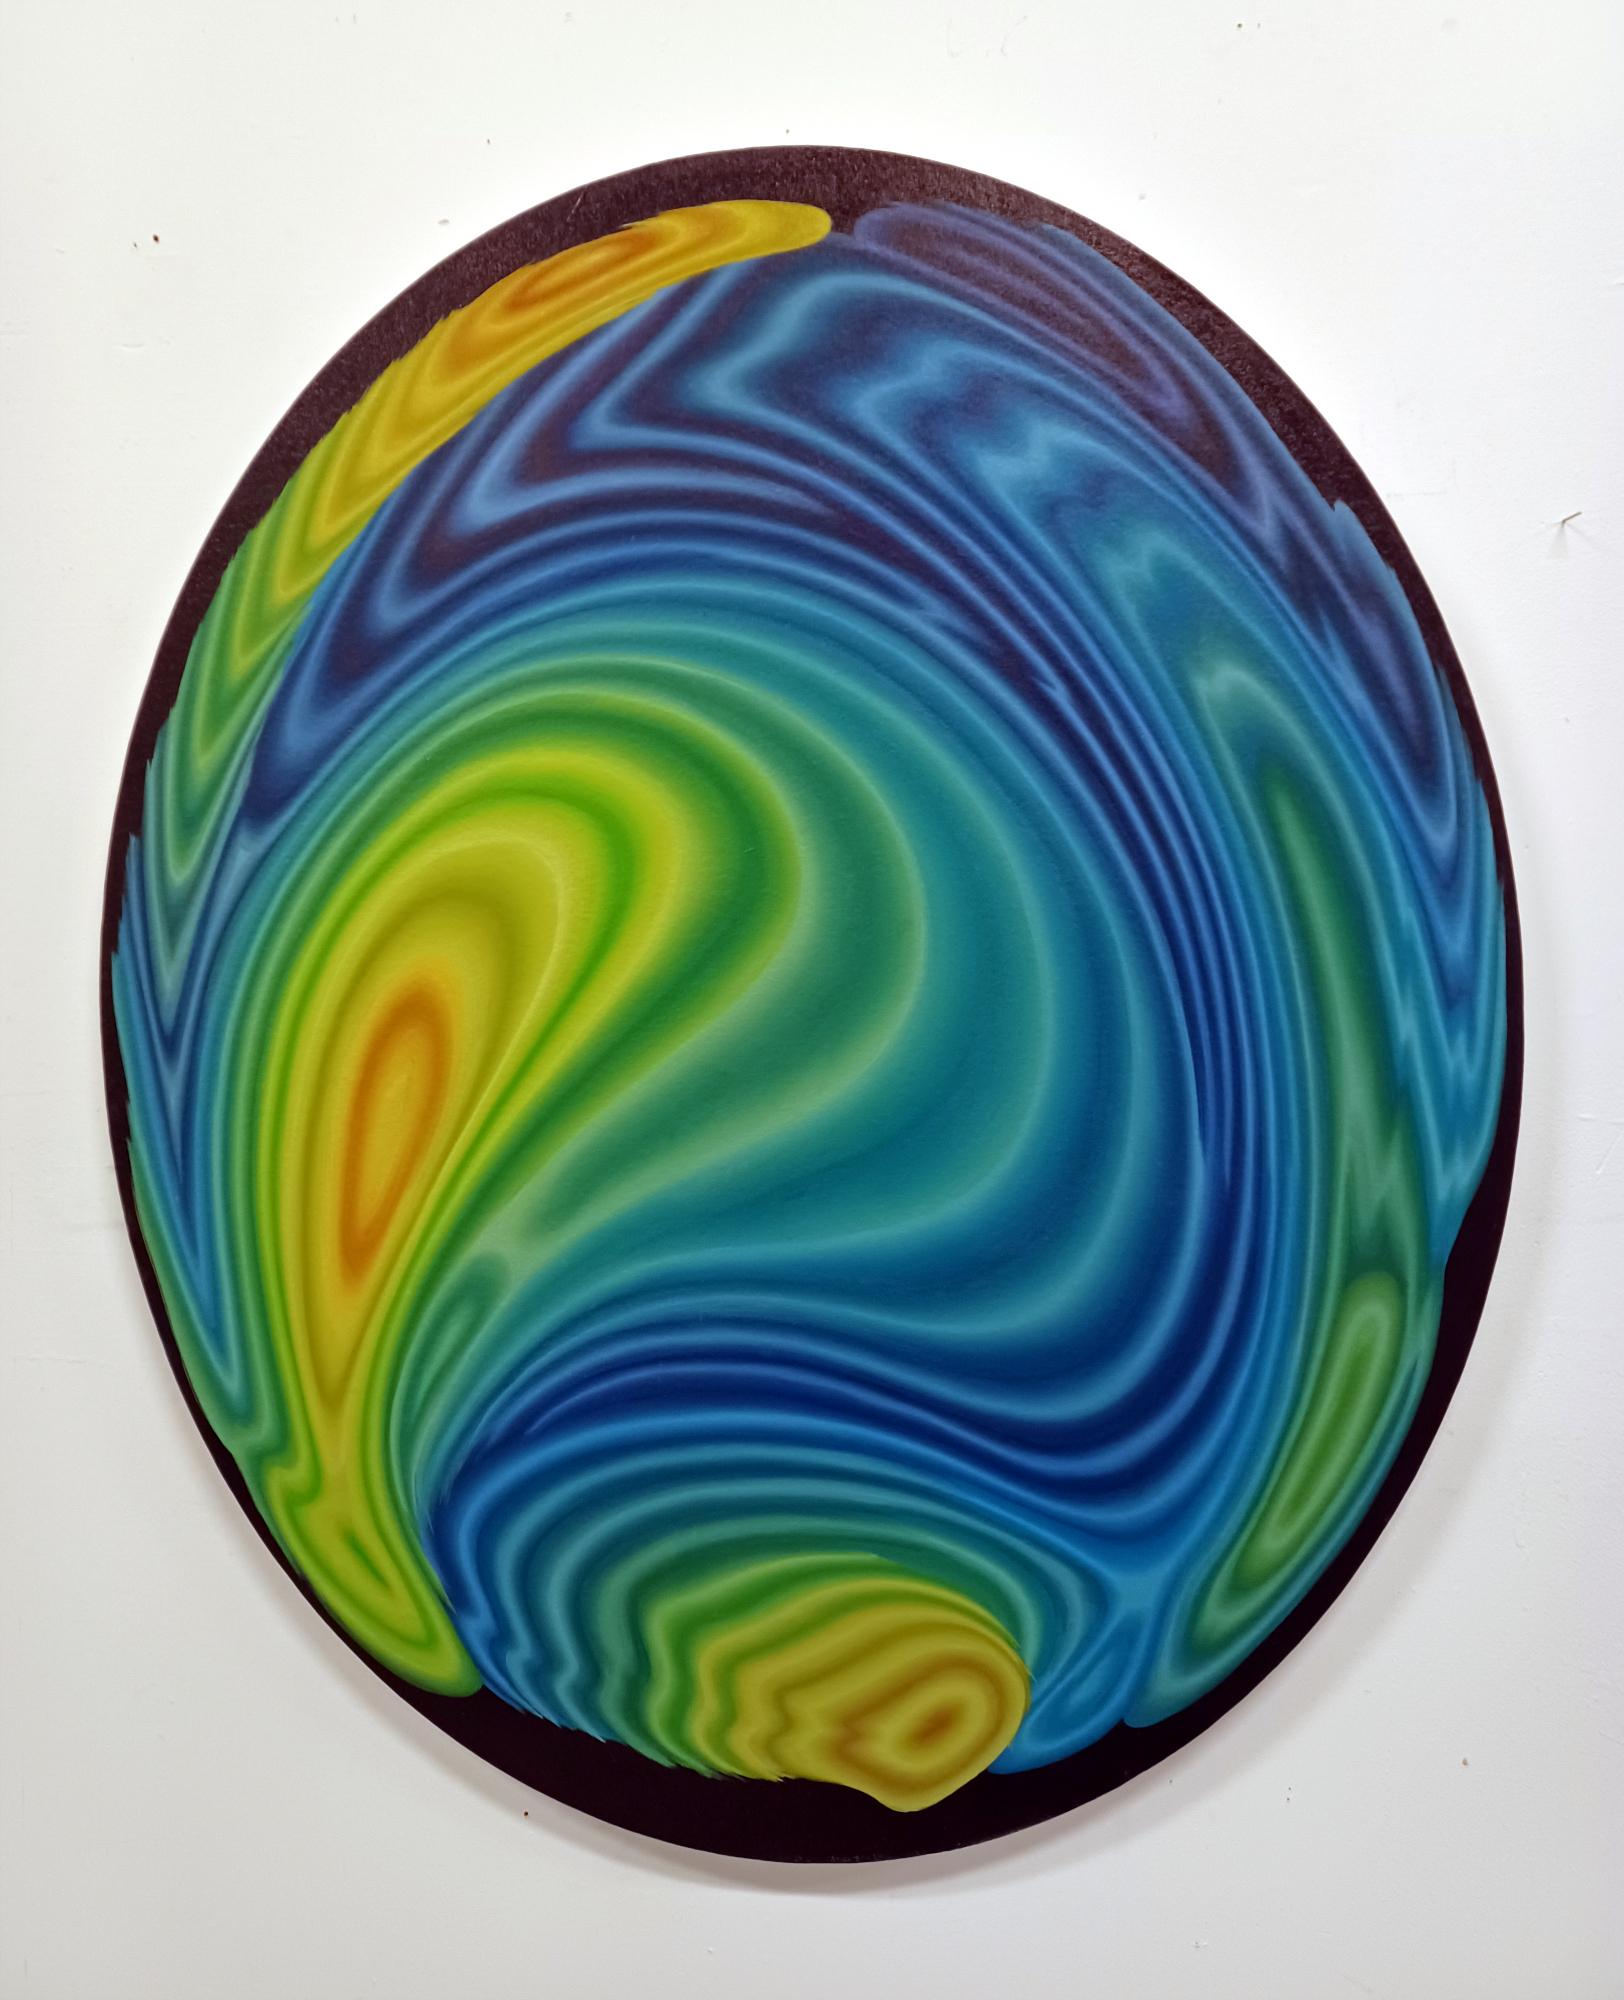 An abstract painting evoking waves, a weather chart or Op art. An optical glass lens used to paint an oval shape canvas.